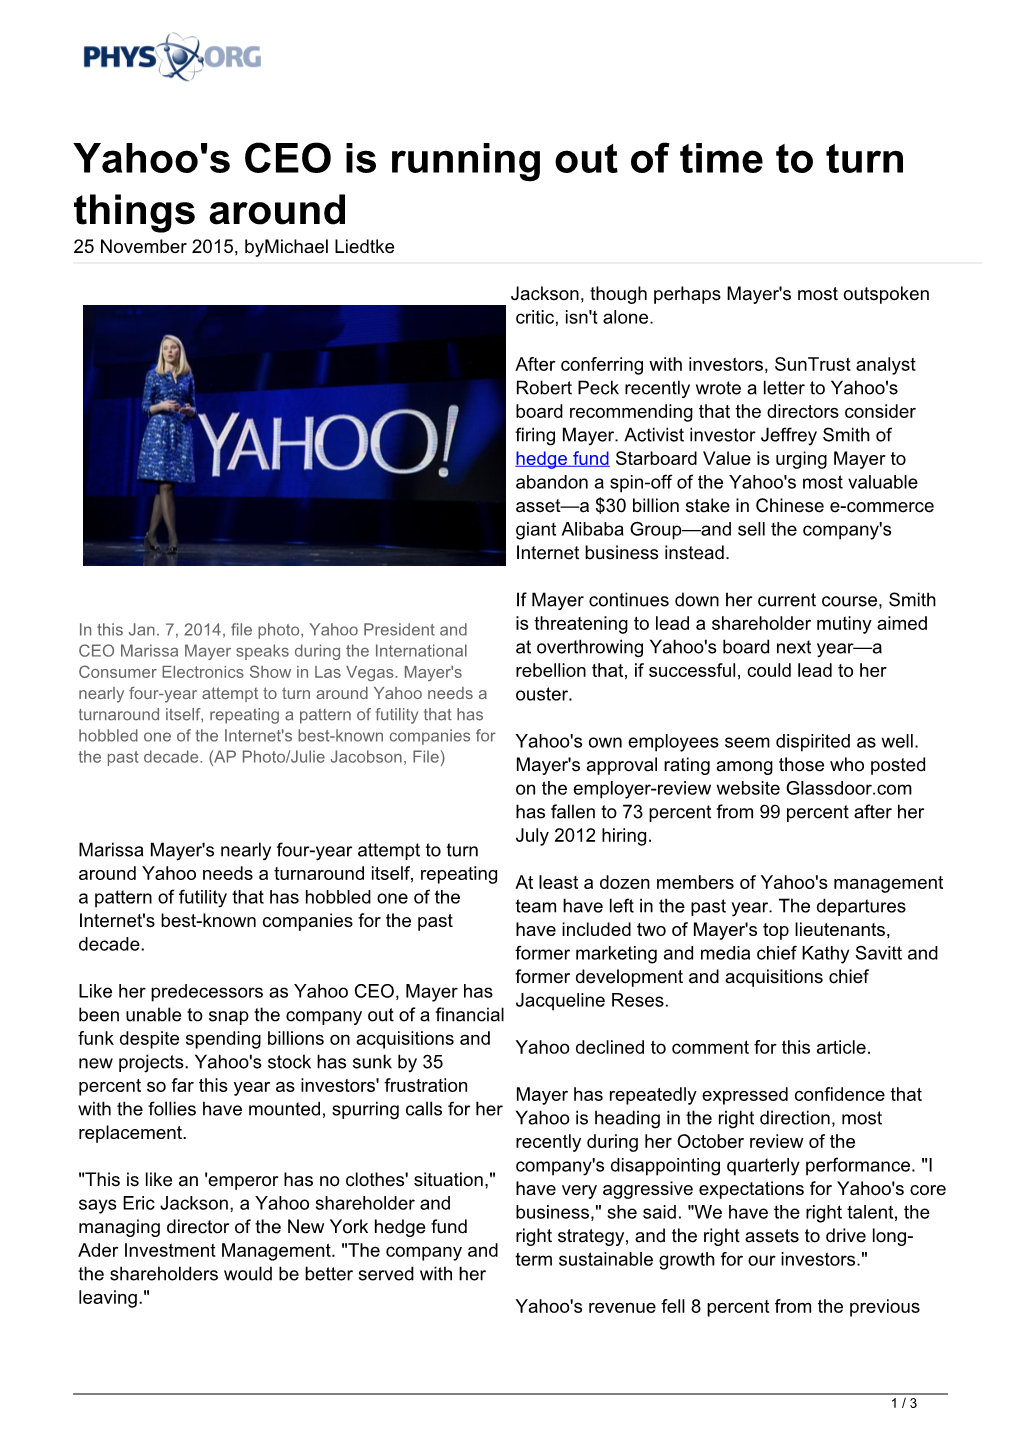 Yahoo's CEO Is Running out of Time to Turn Things Around 25 November 2015, Bymichael Liedtke